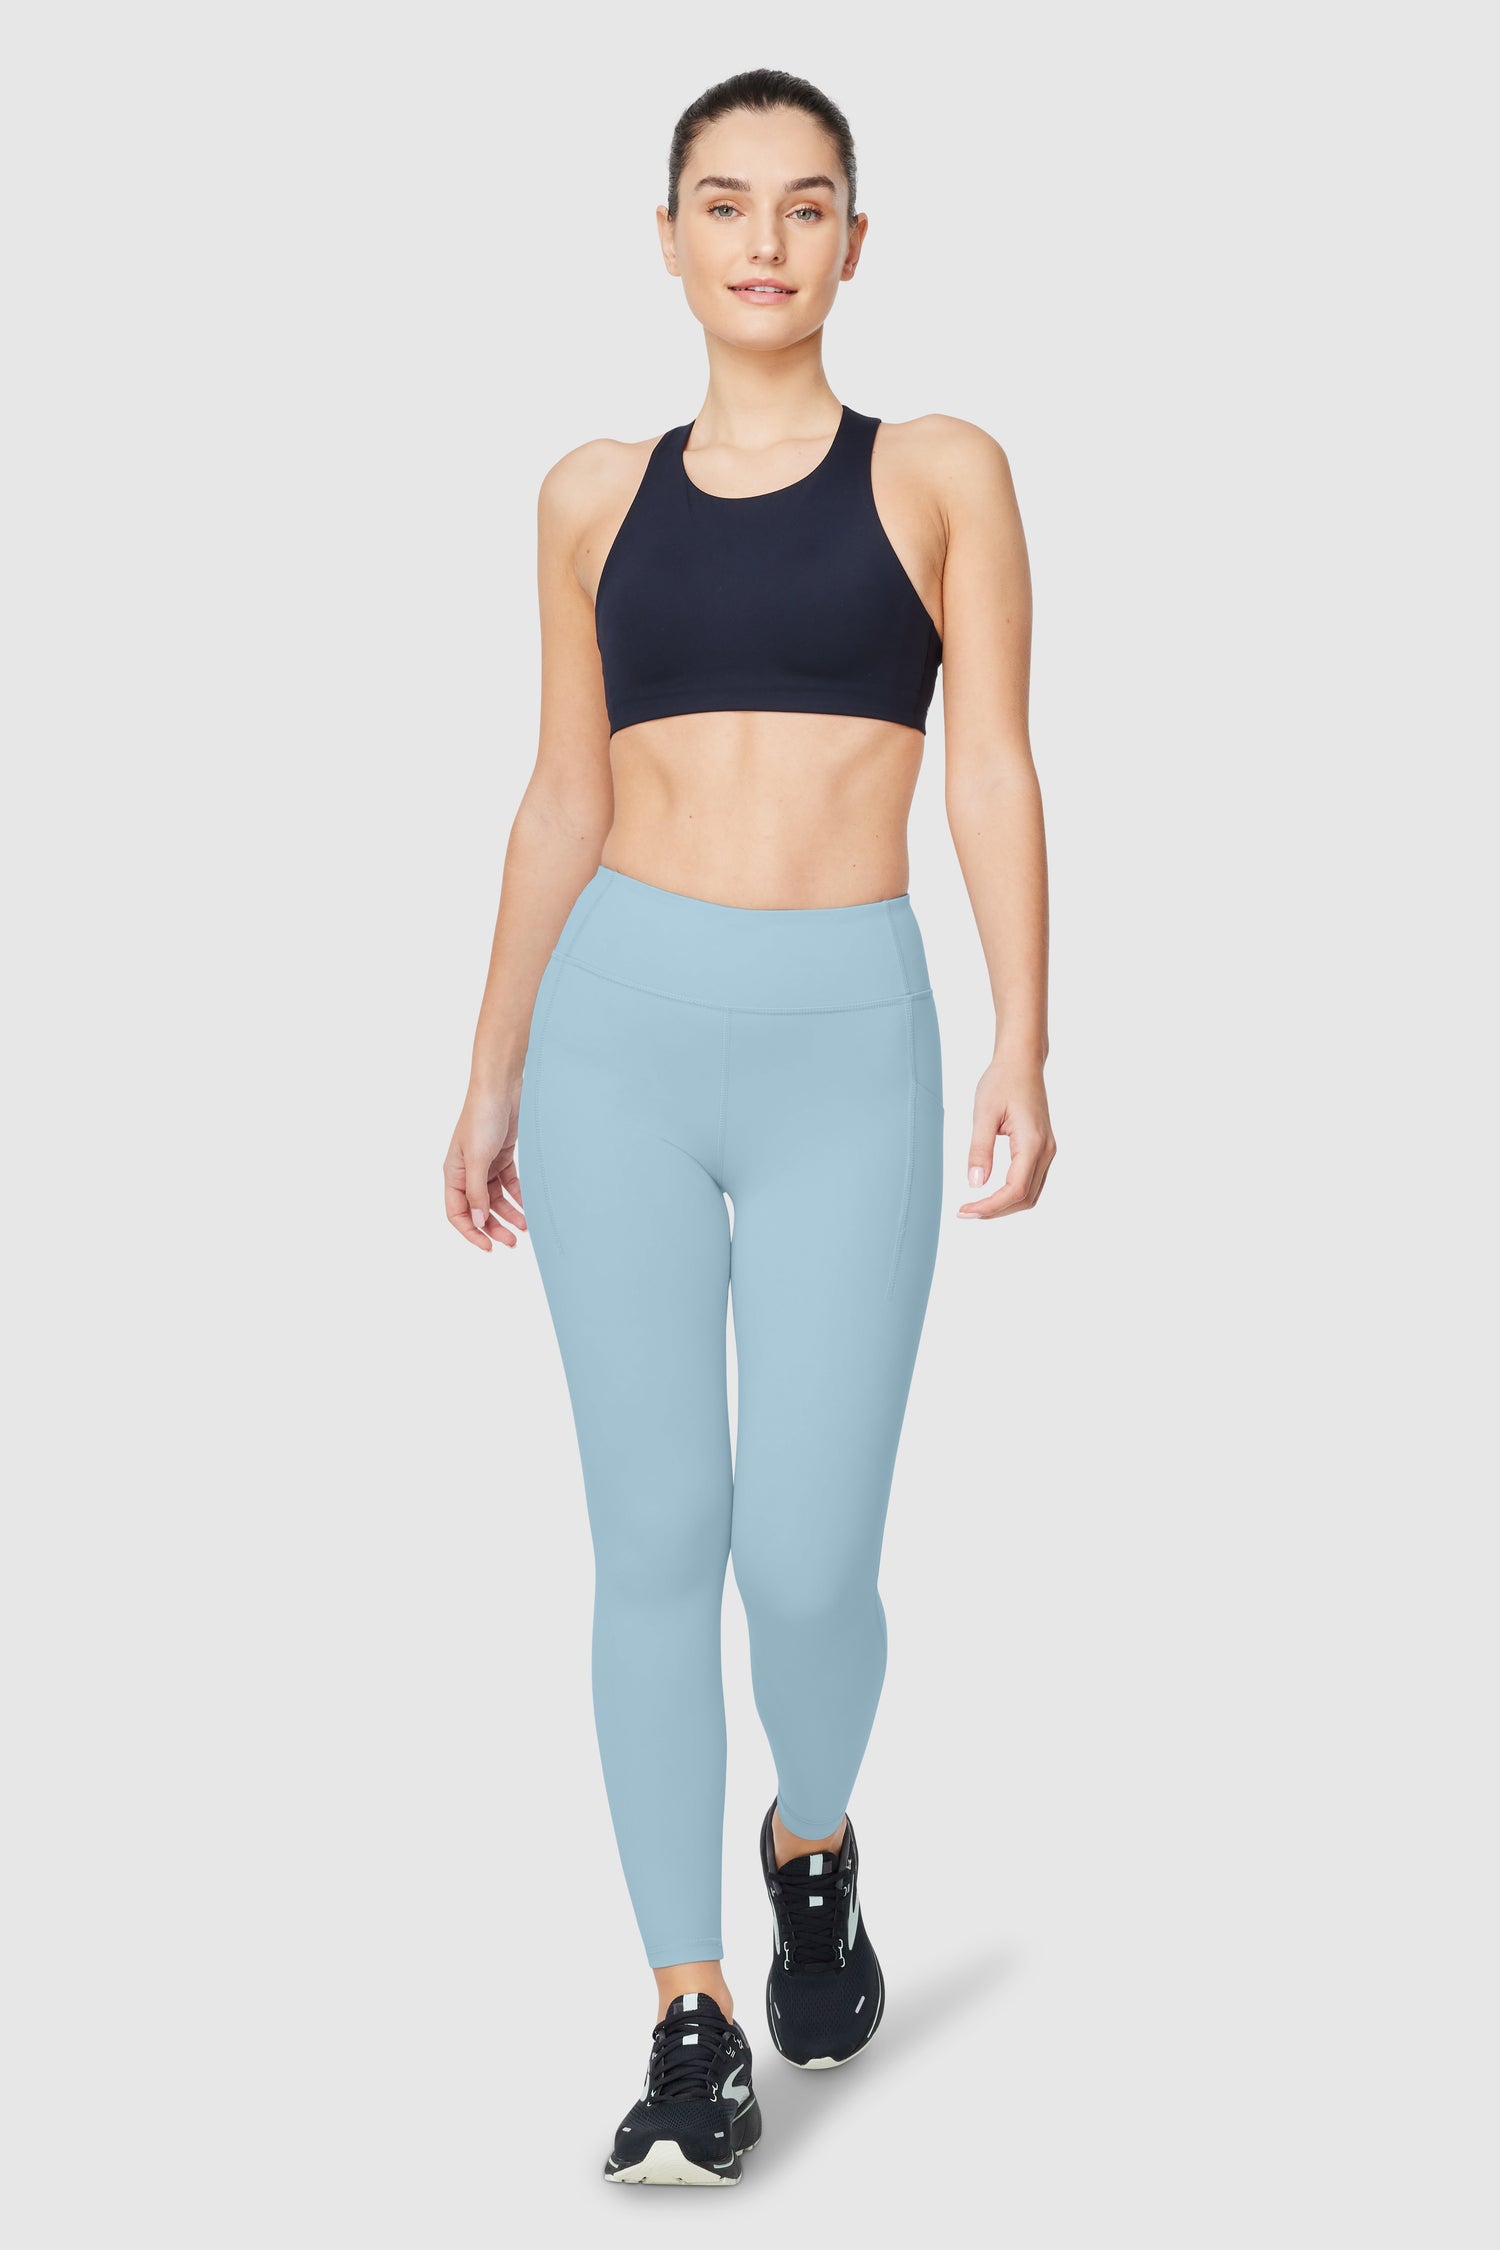 Push FWD Women's On The Fly 7/8 Tight - BEST SELLING